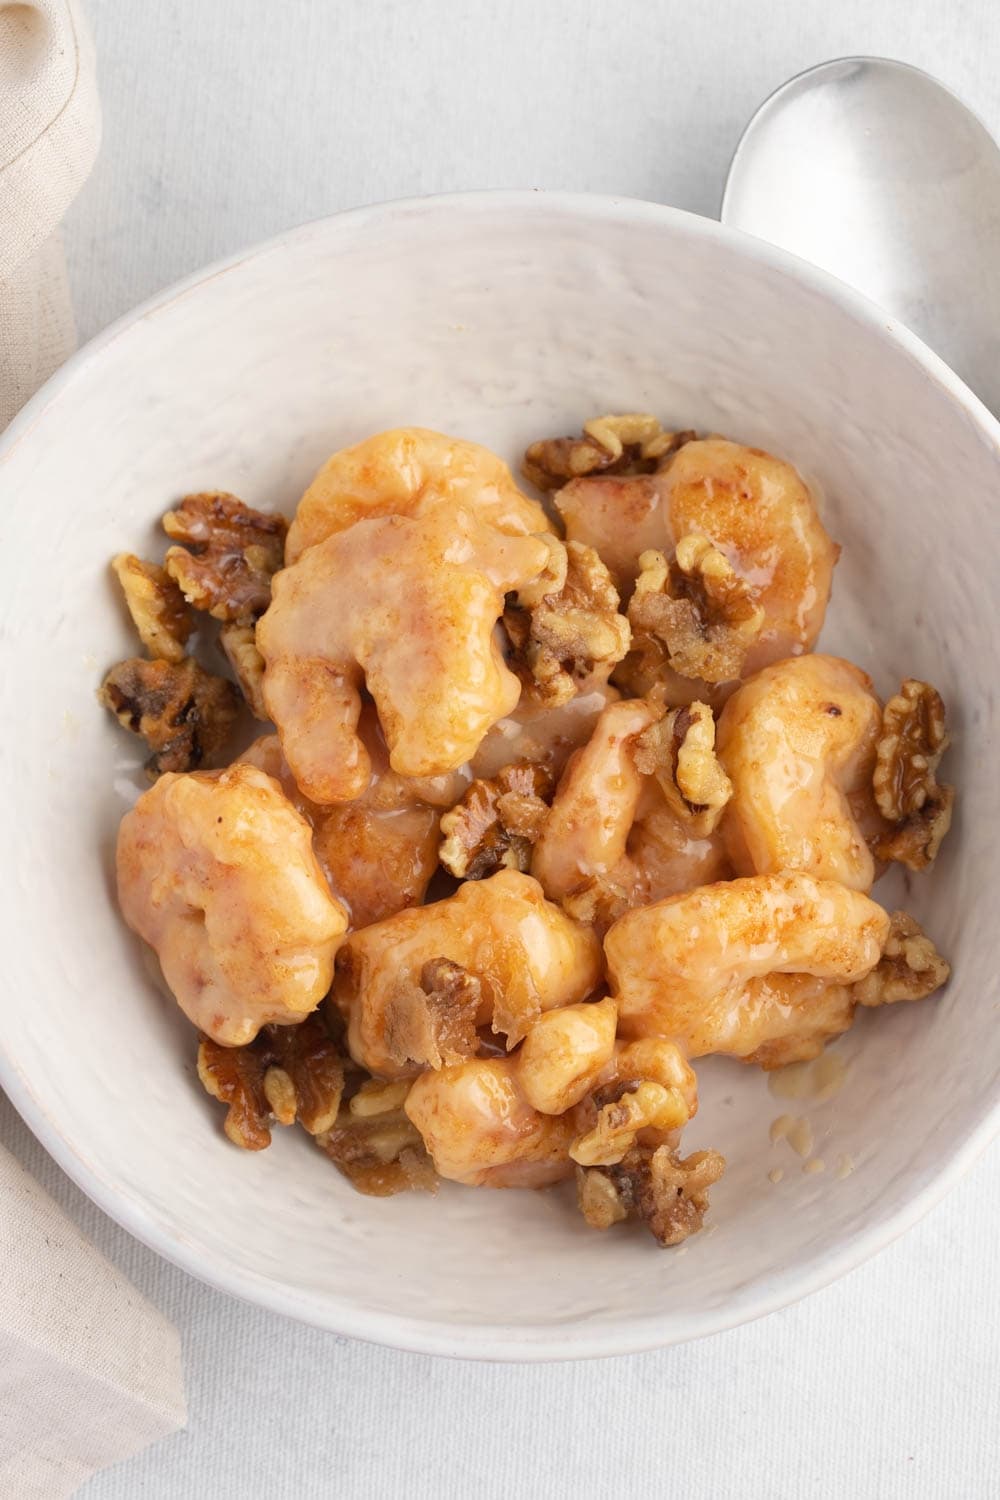 Top View of a Bowl With Honey Walnut Shrimp with Sweet and Creamy Sauce 